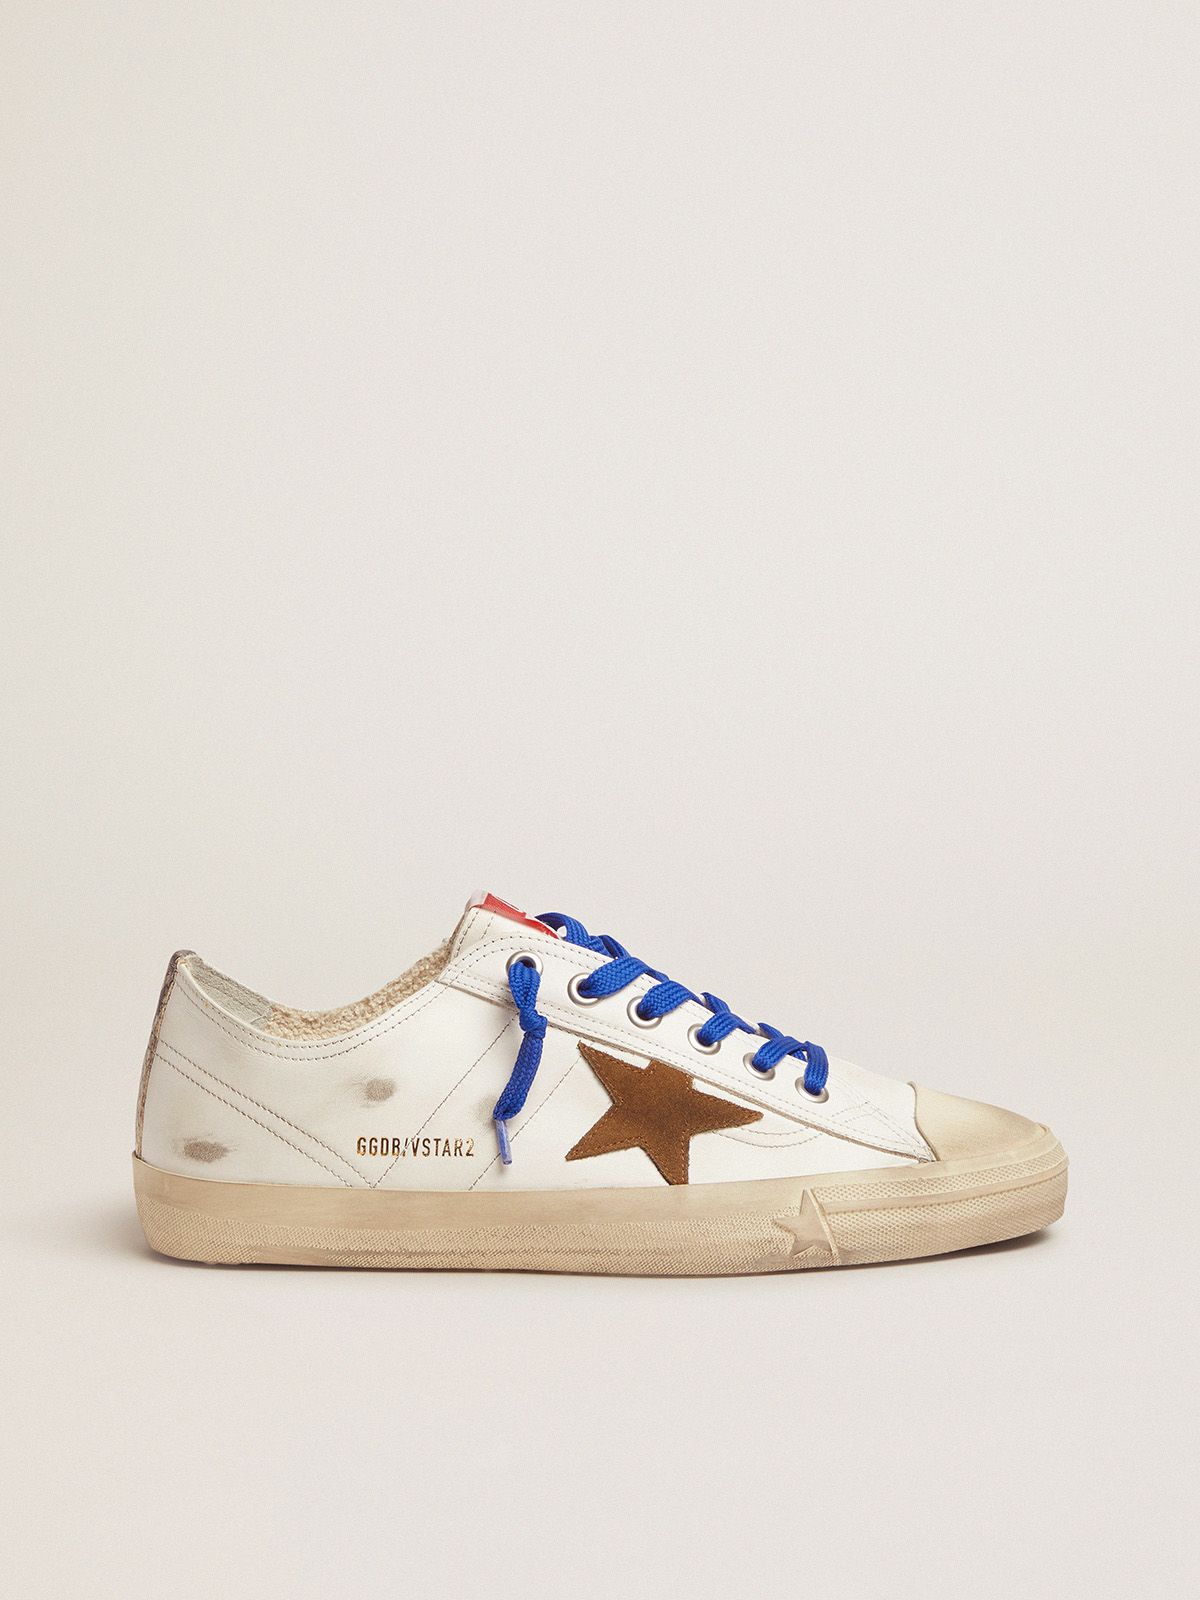 golden goose blue with strip snake-print laces vertical V-Star sneakers and LTD